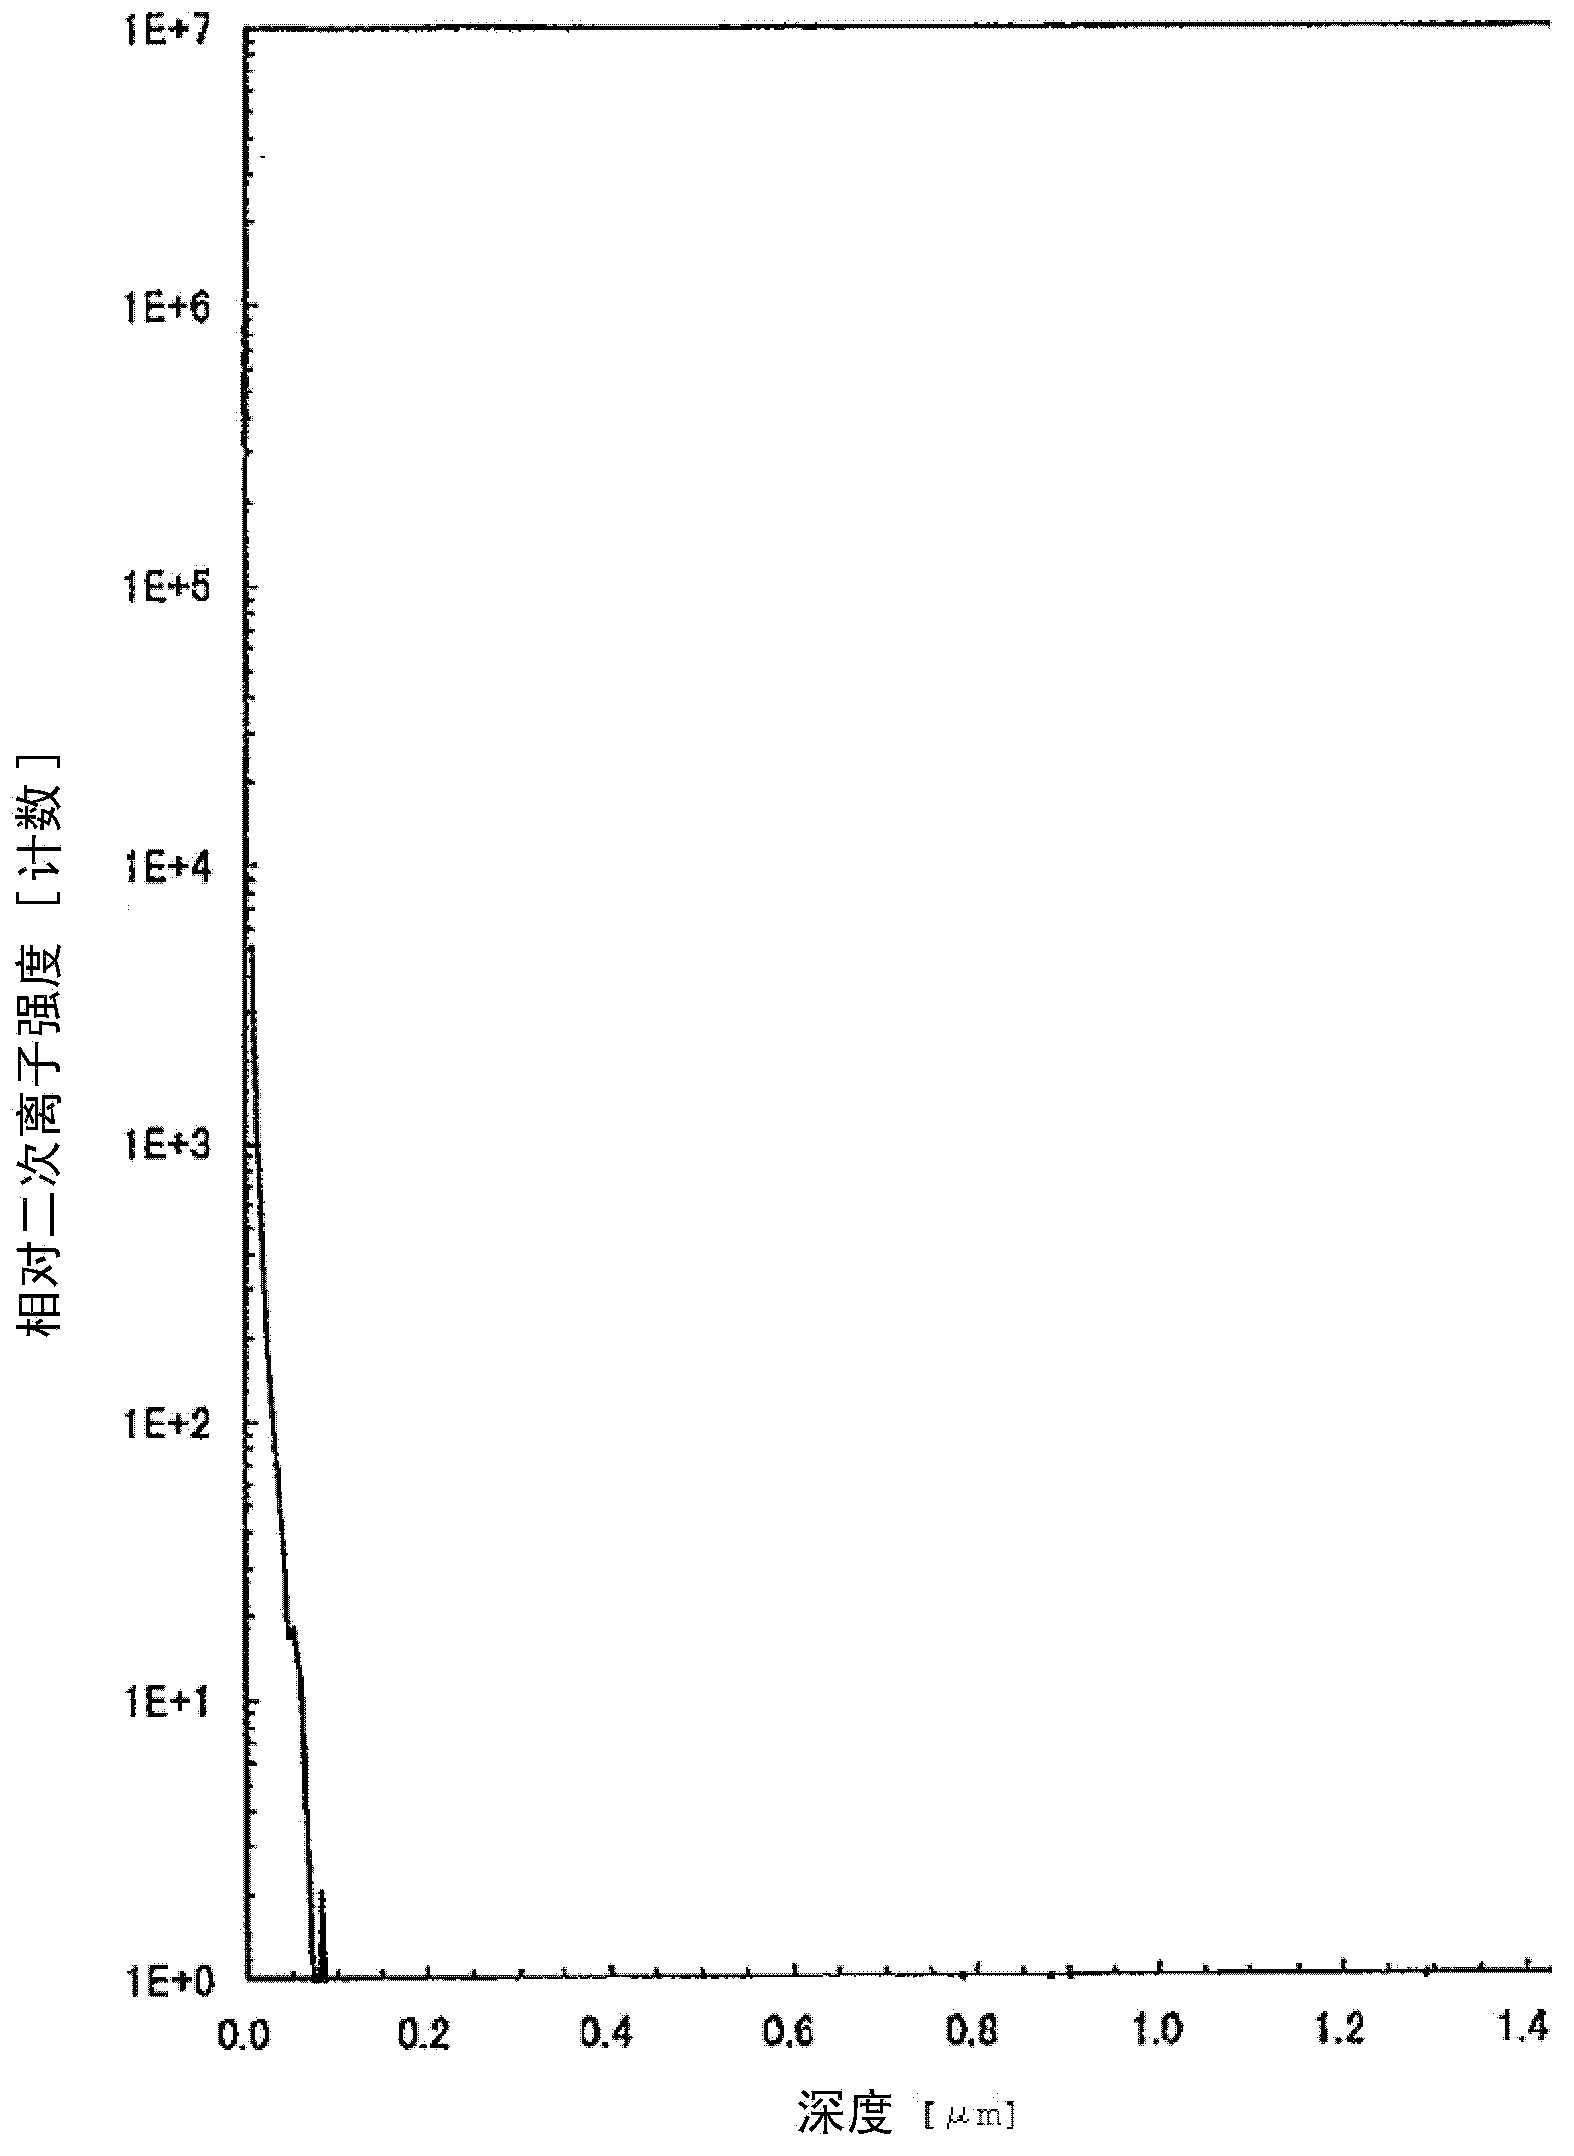 Copper-platinum alloy wire for connecting in semiconductor apparatus